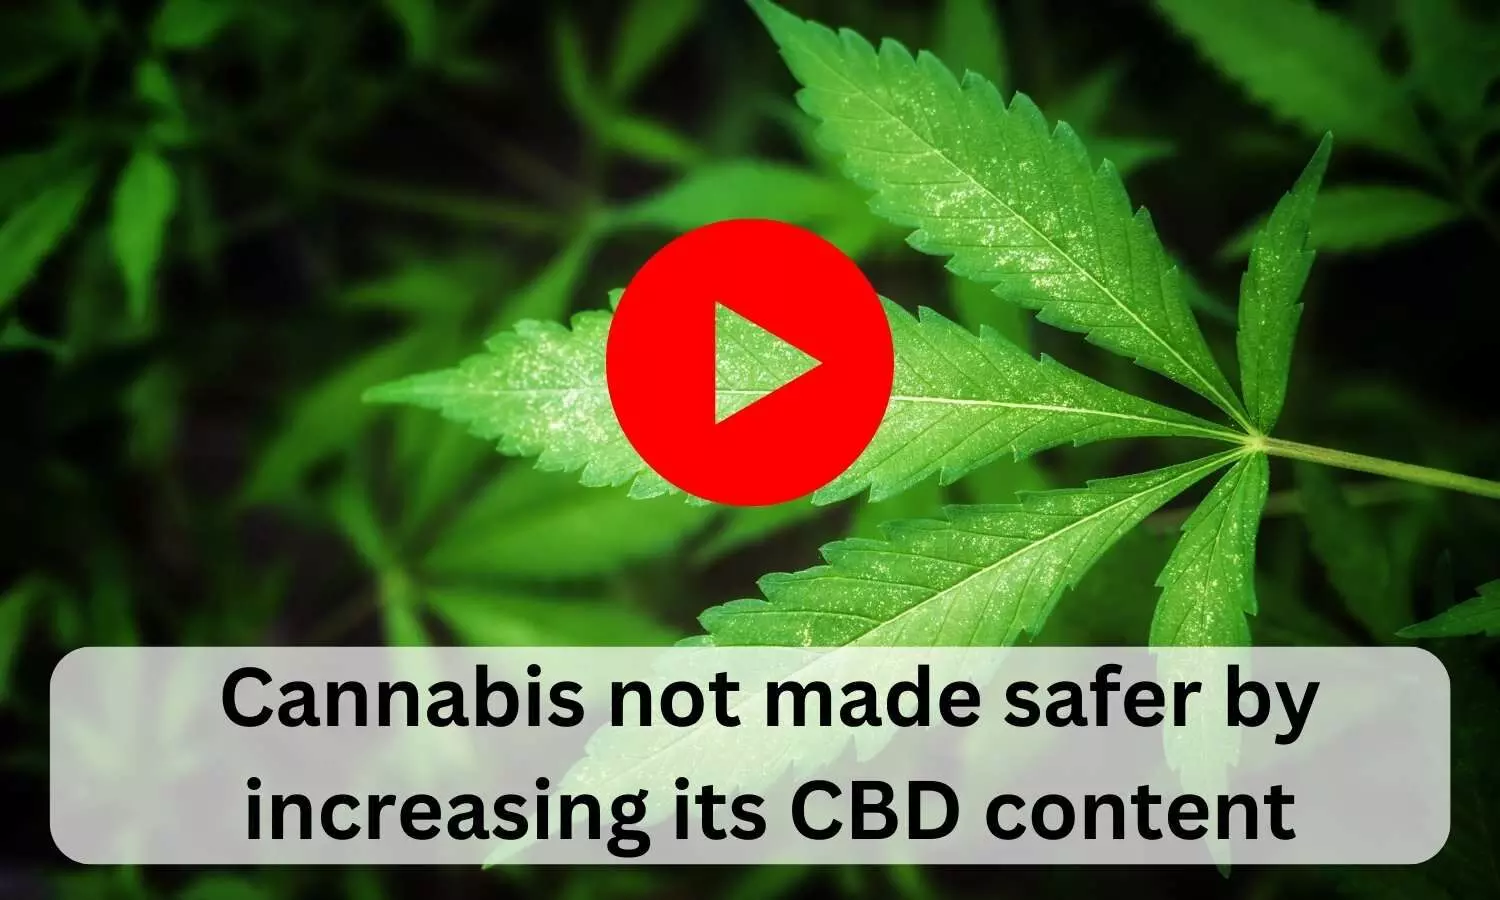 Cannabis not made safer by increasing its CBD content